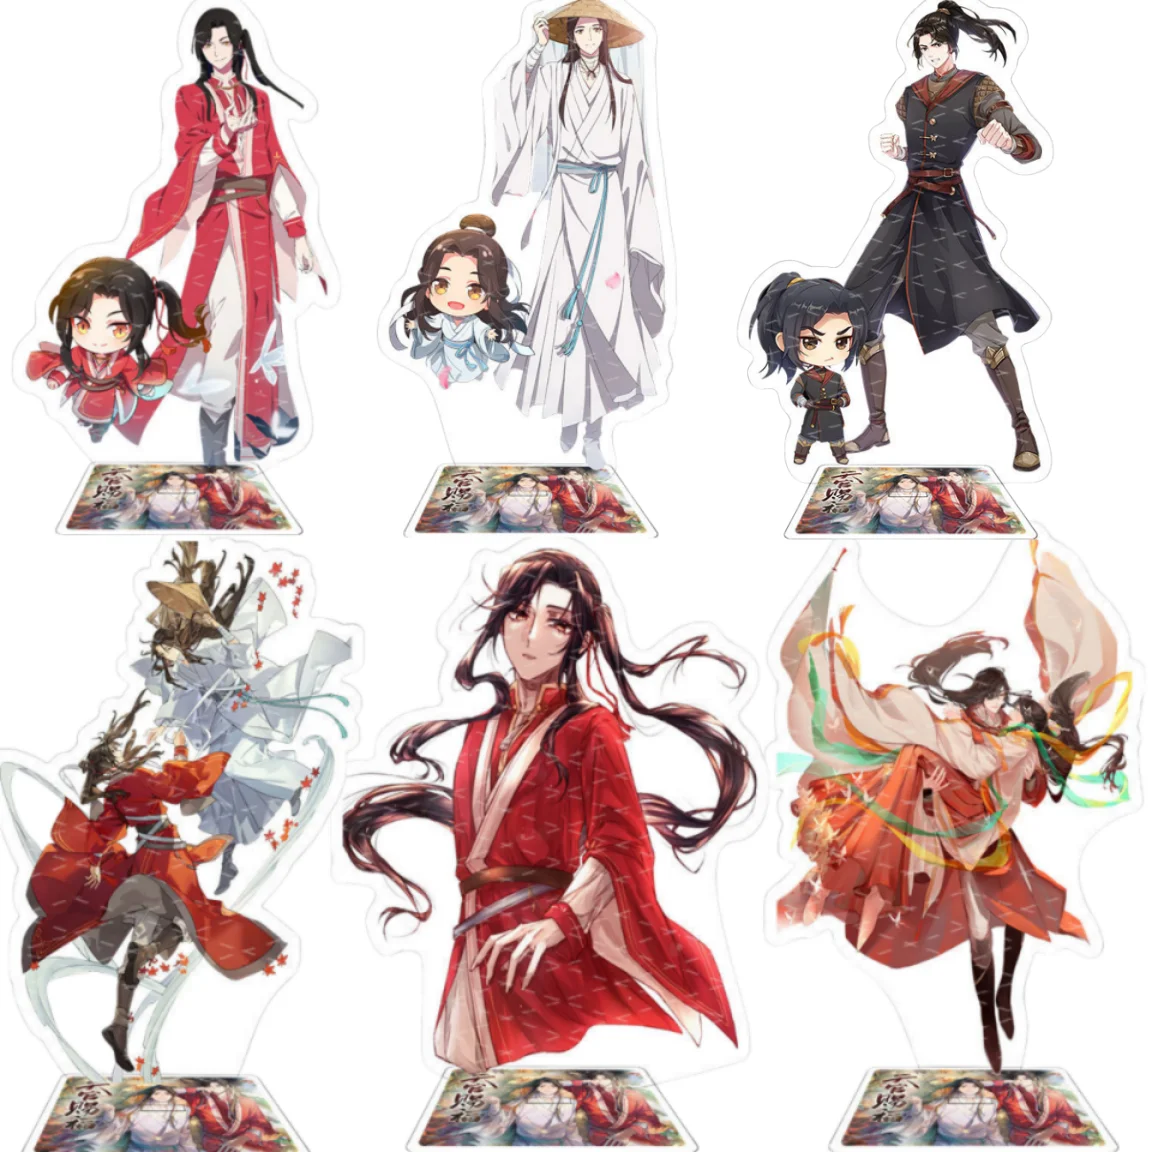 heavenly minded mom Hot Anime Heavenly God Blesses The People Tian Guan Ci Fu Xie Lian Hua Cheng Acrylic Stand Model Cartoon Figures Fans Gifts 15cm